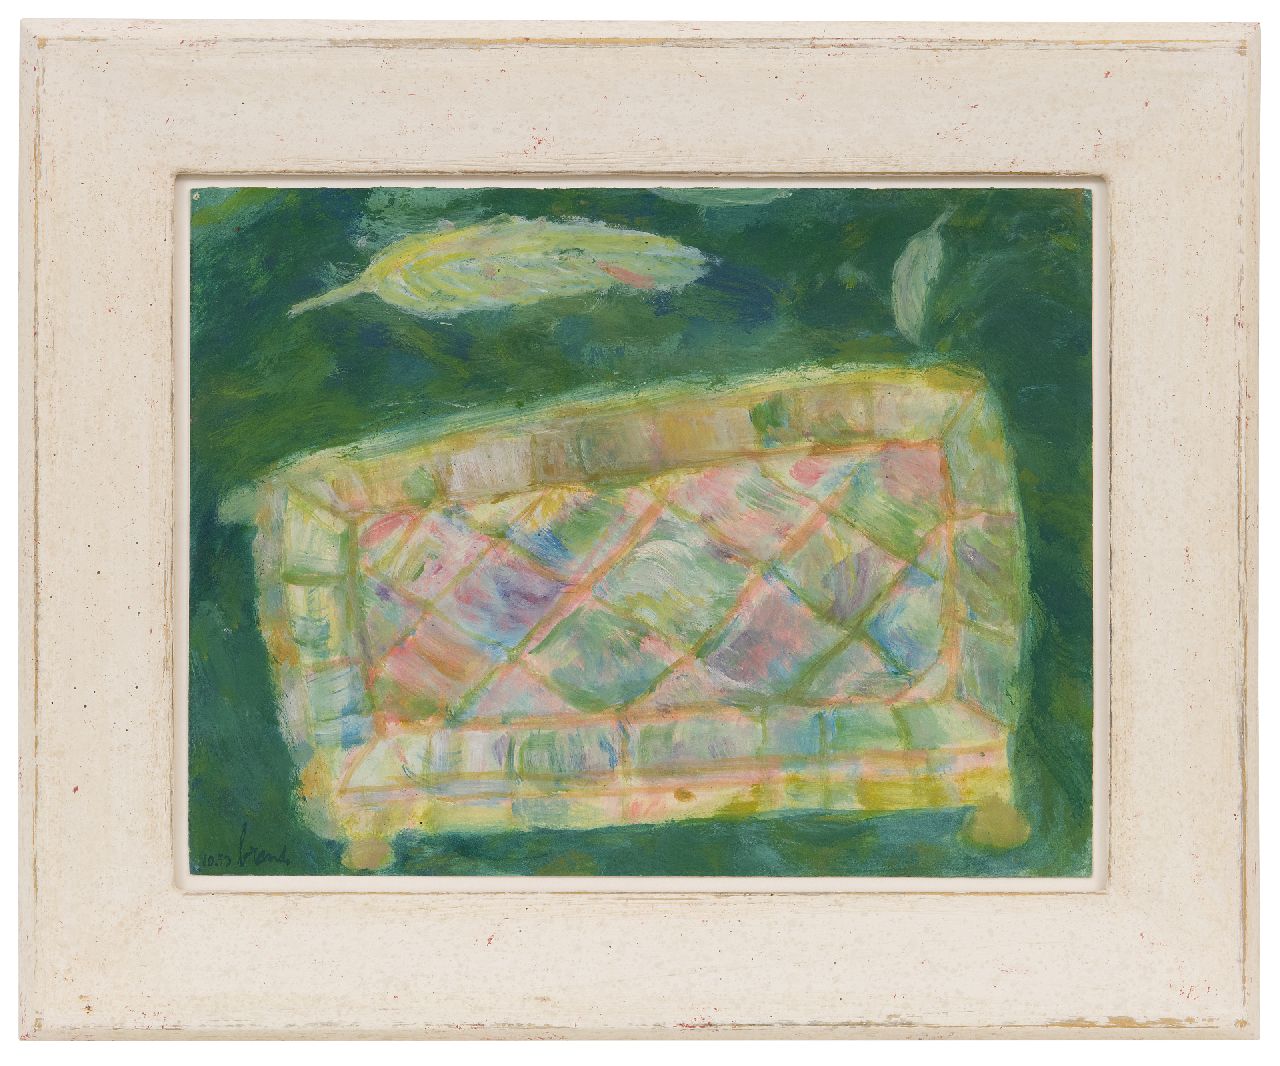 Brands E.A.M.  | Eugenius Antonius Maria 'Eugène' Brands | Watercolours and drawings offered for sale | The mother-of-pearl box, gouache on paper 26.7 x 34.8 cm, signed l.l. and dated 10.53